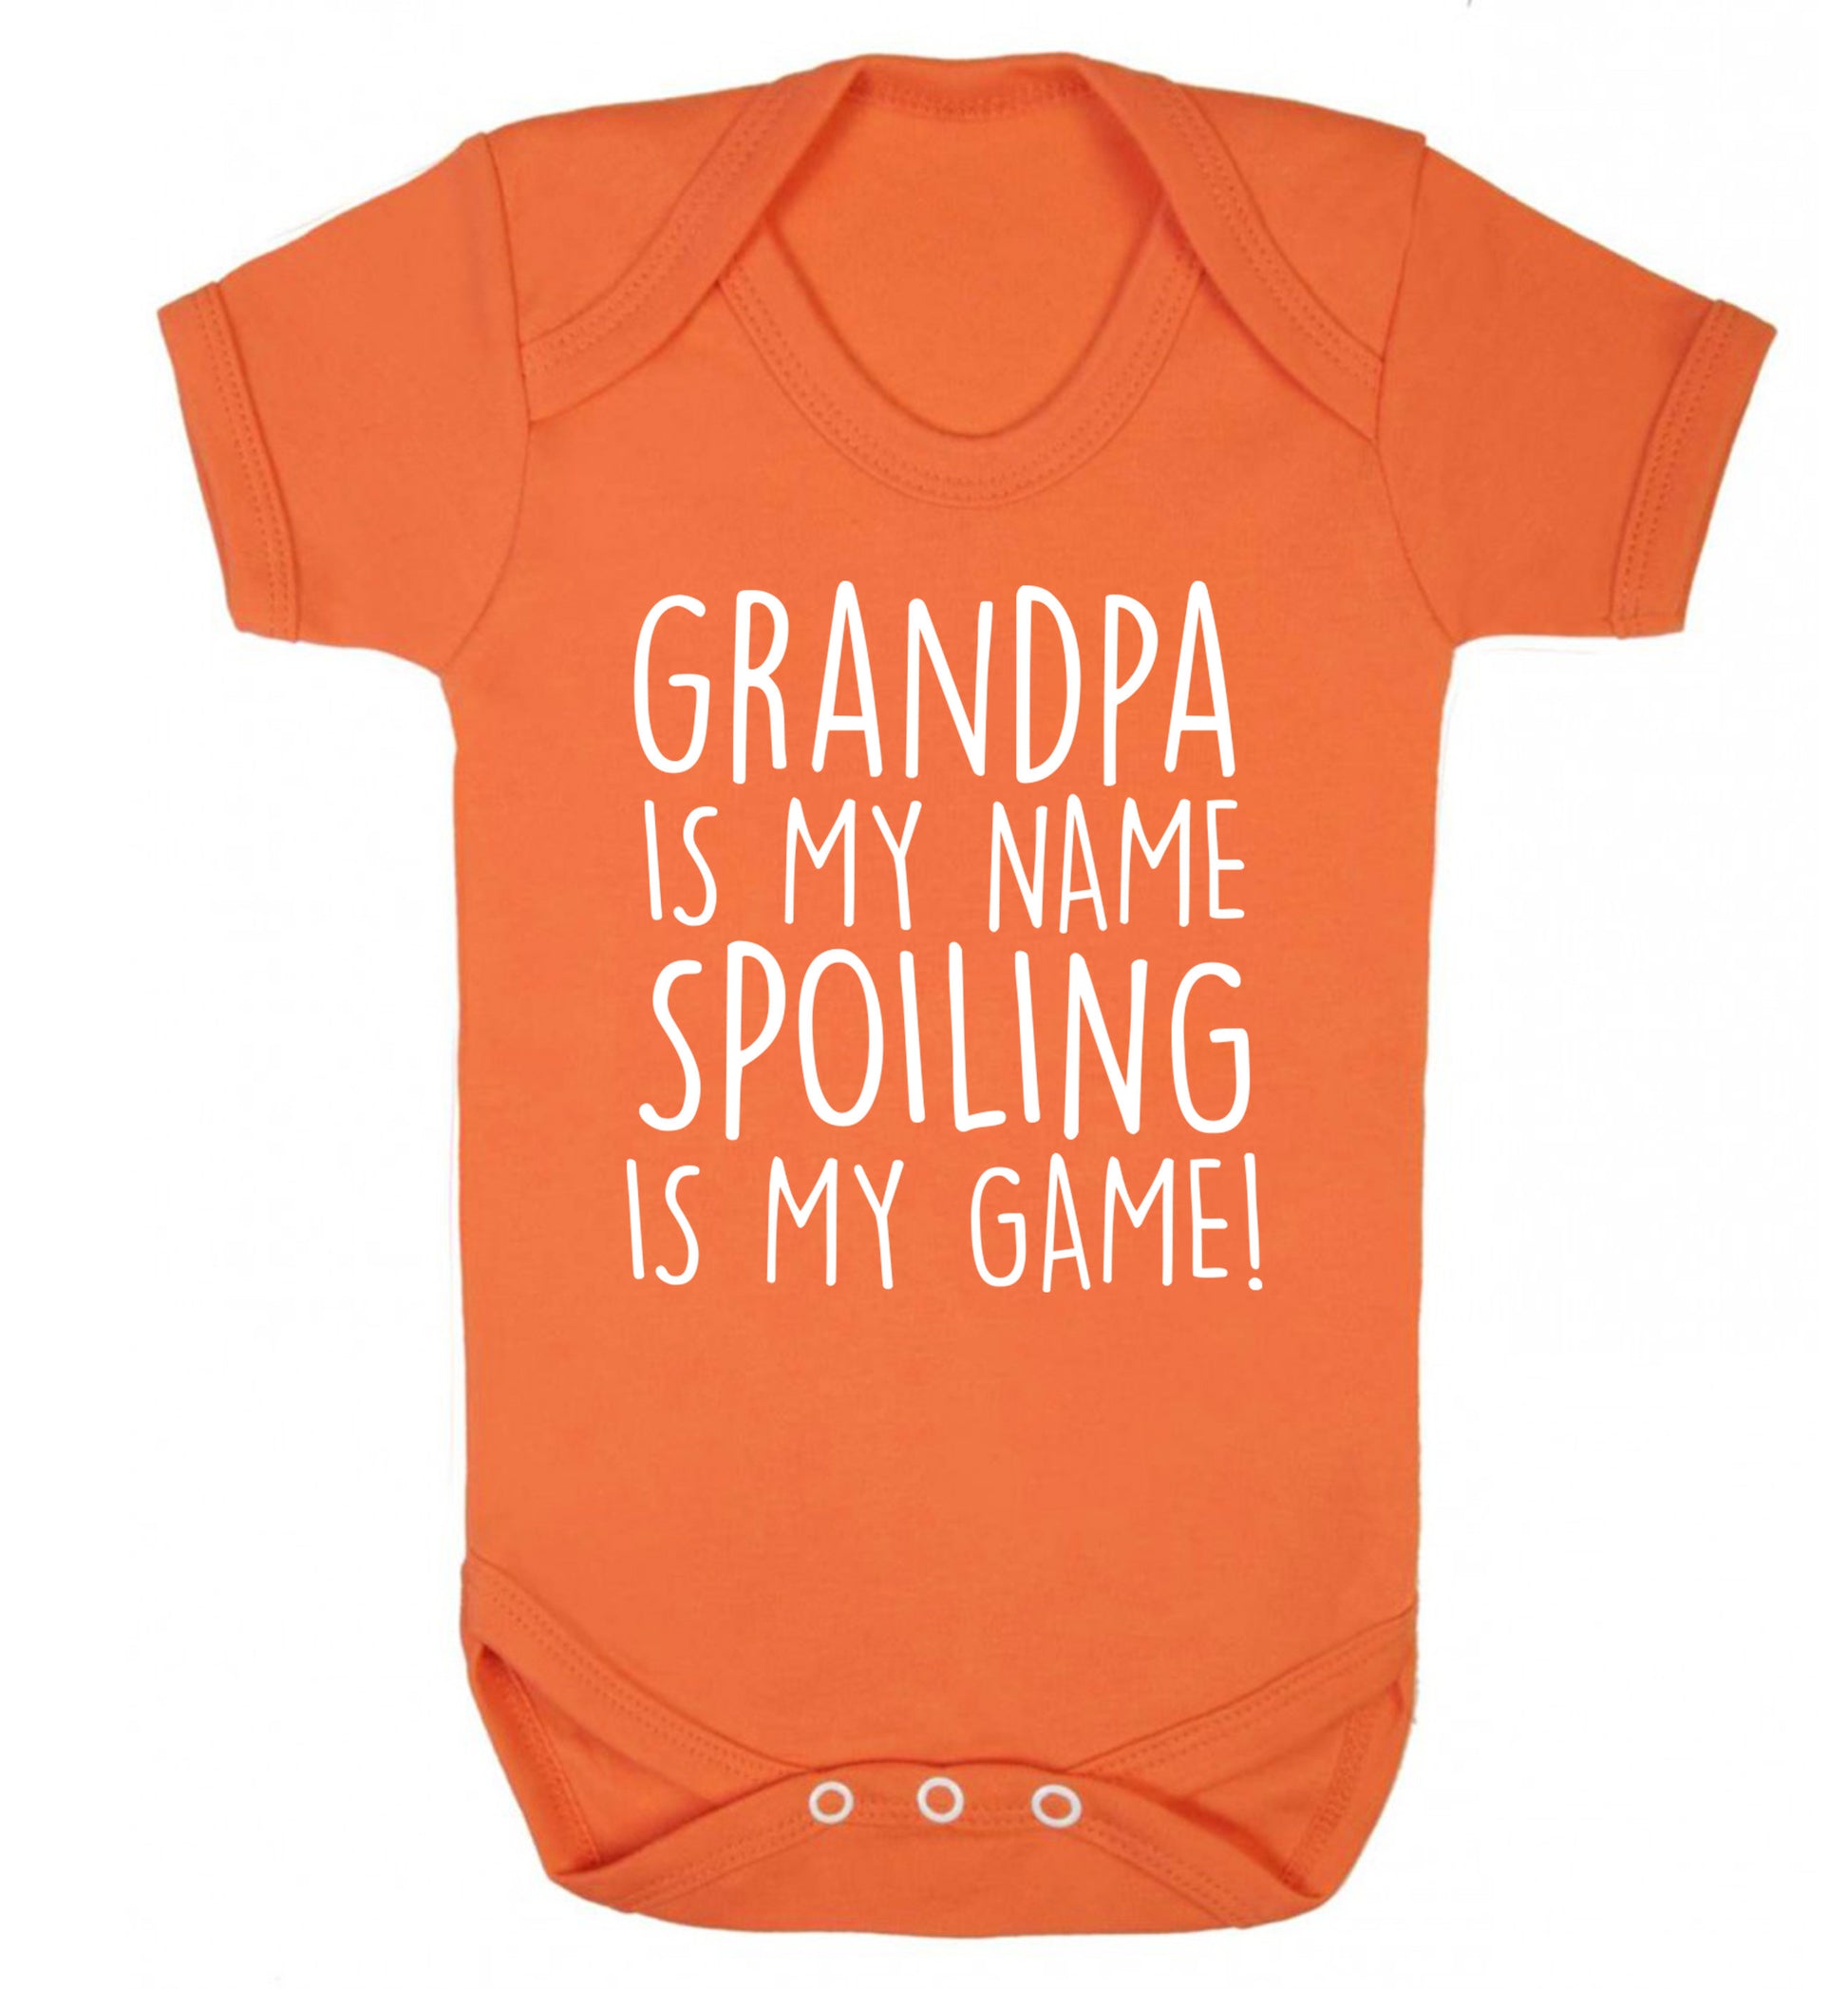 Grandpa is my name, spoiling is my game Baby Vest orange 18-24 months